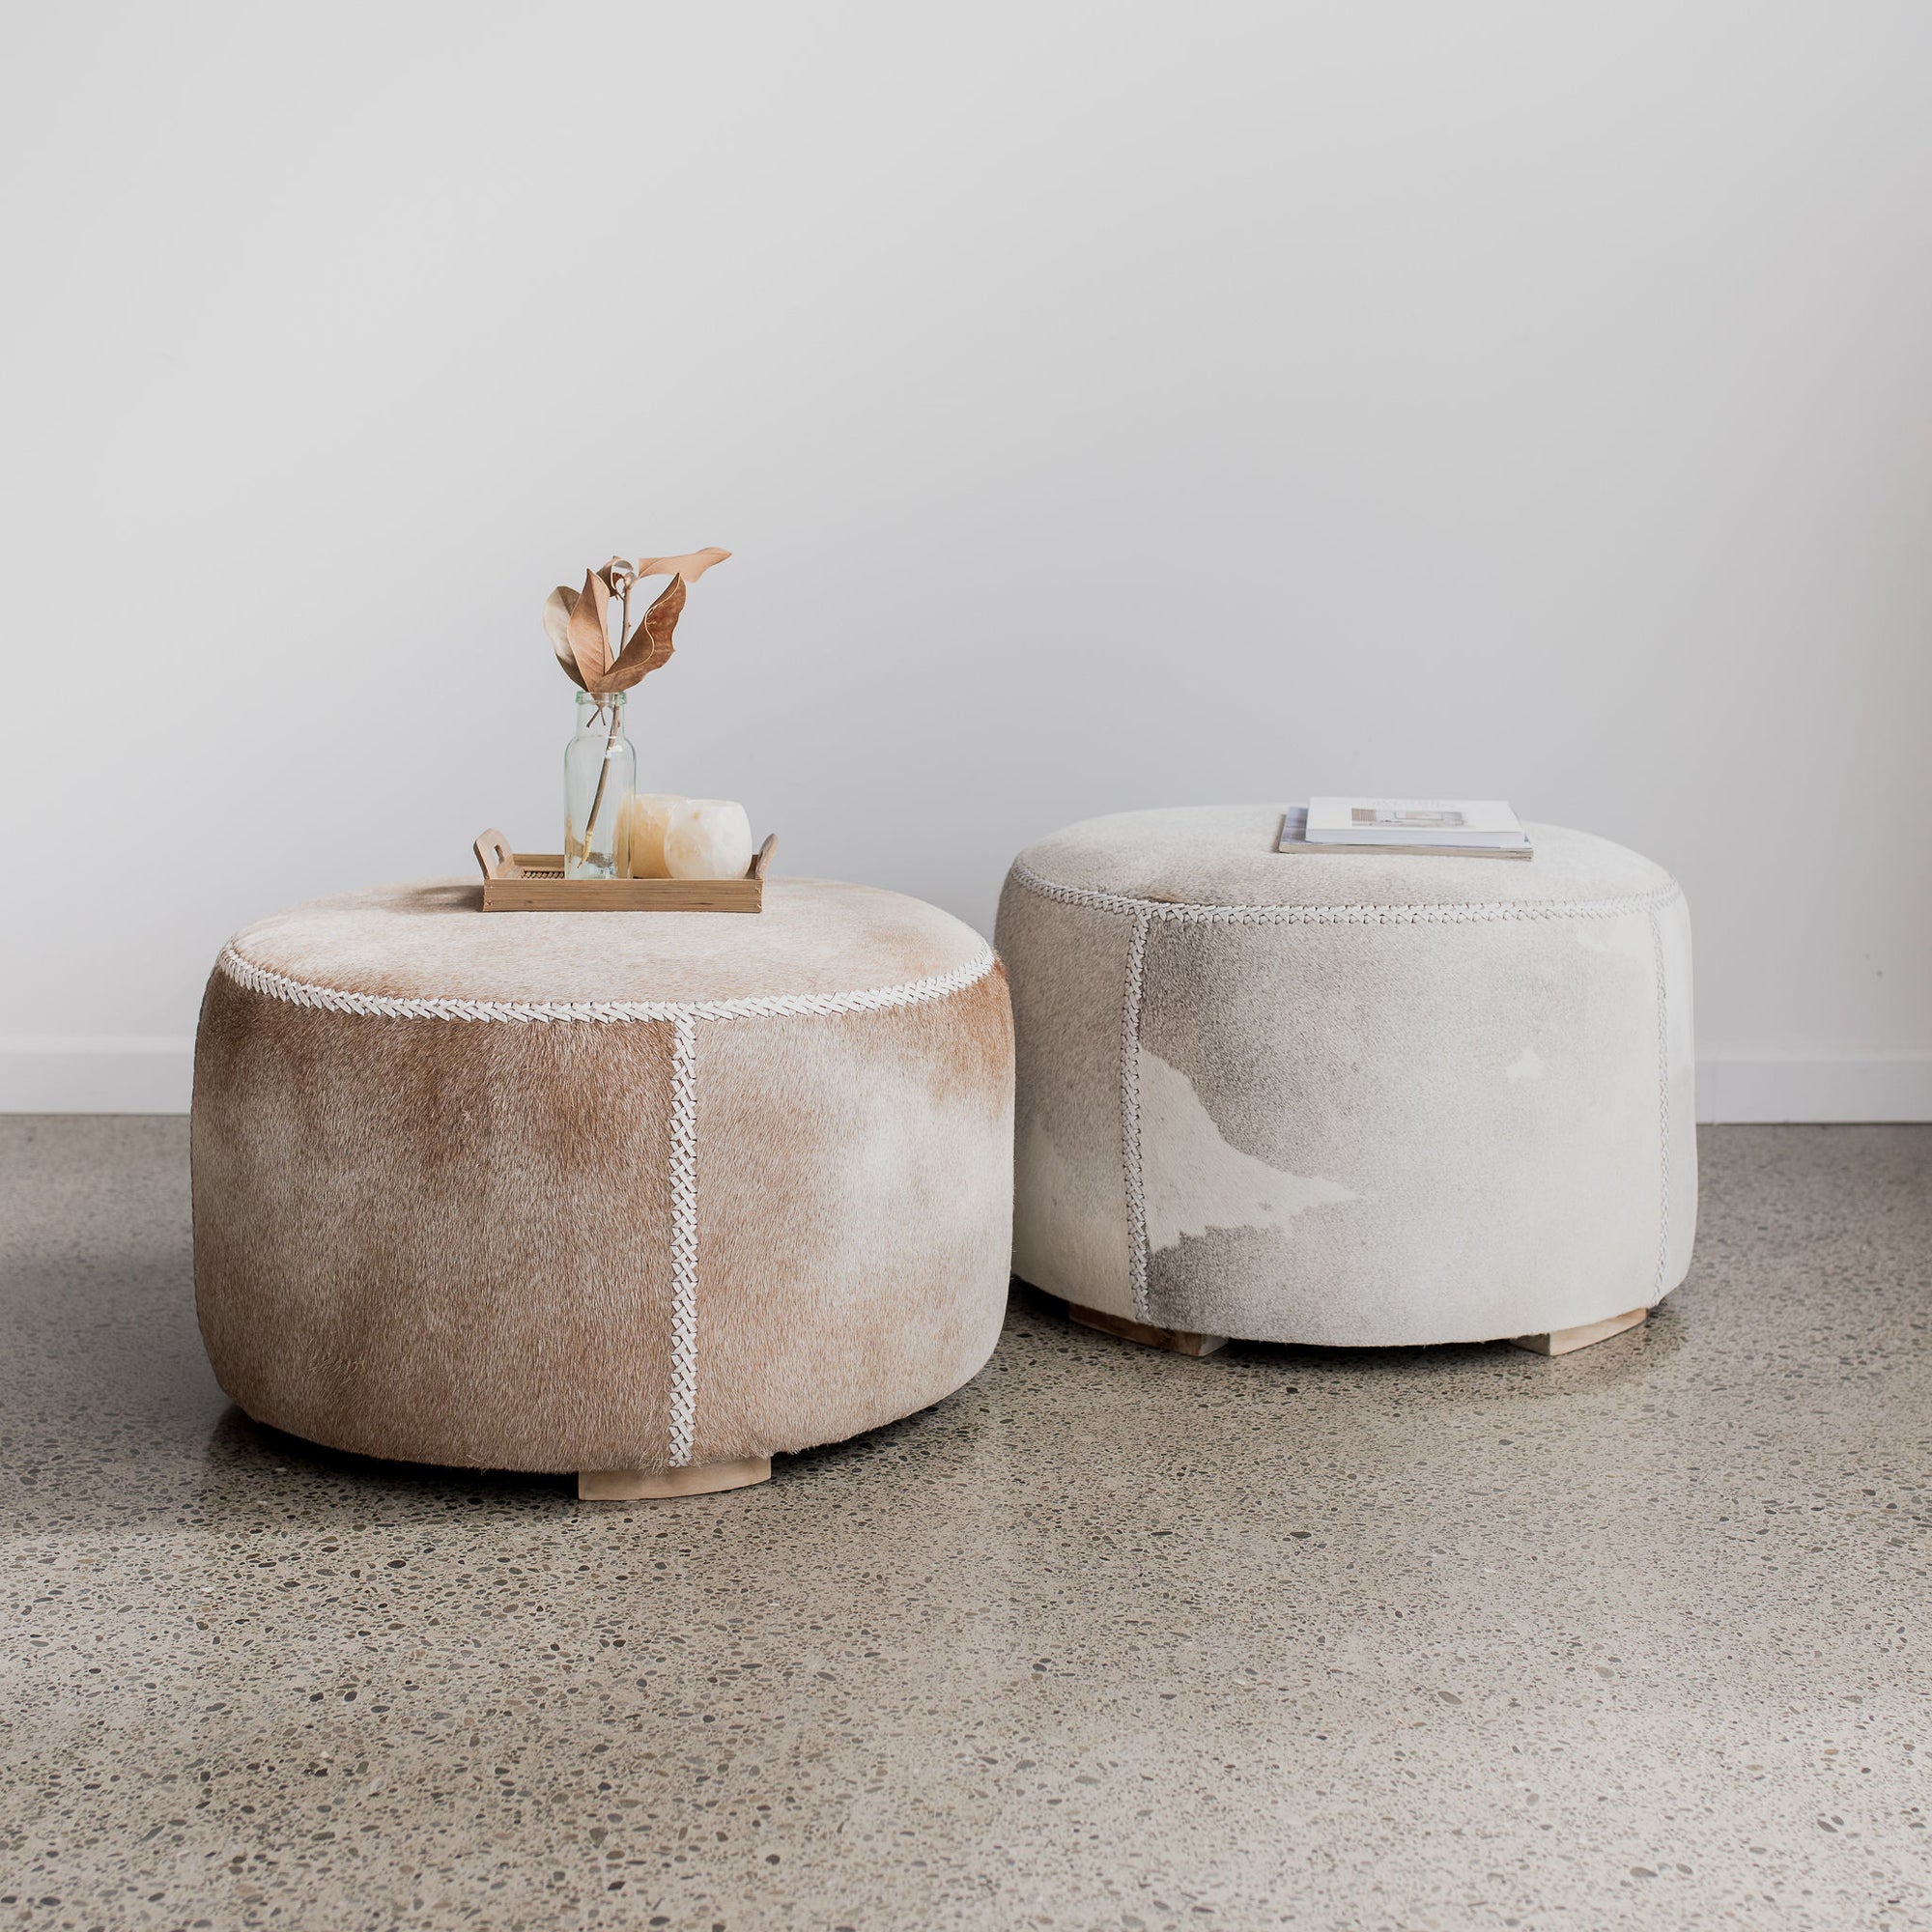 Corcovado caramel colored hide round ottoman next to a gray hide on a round ottoman